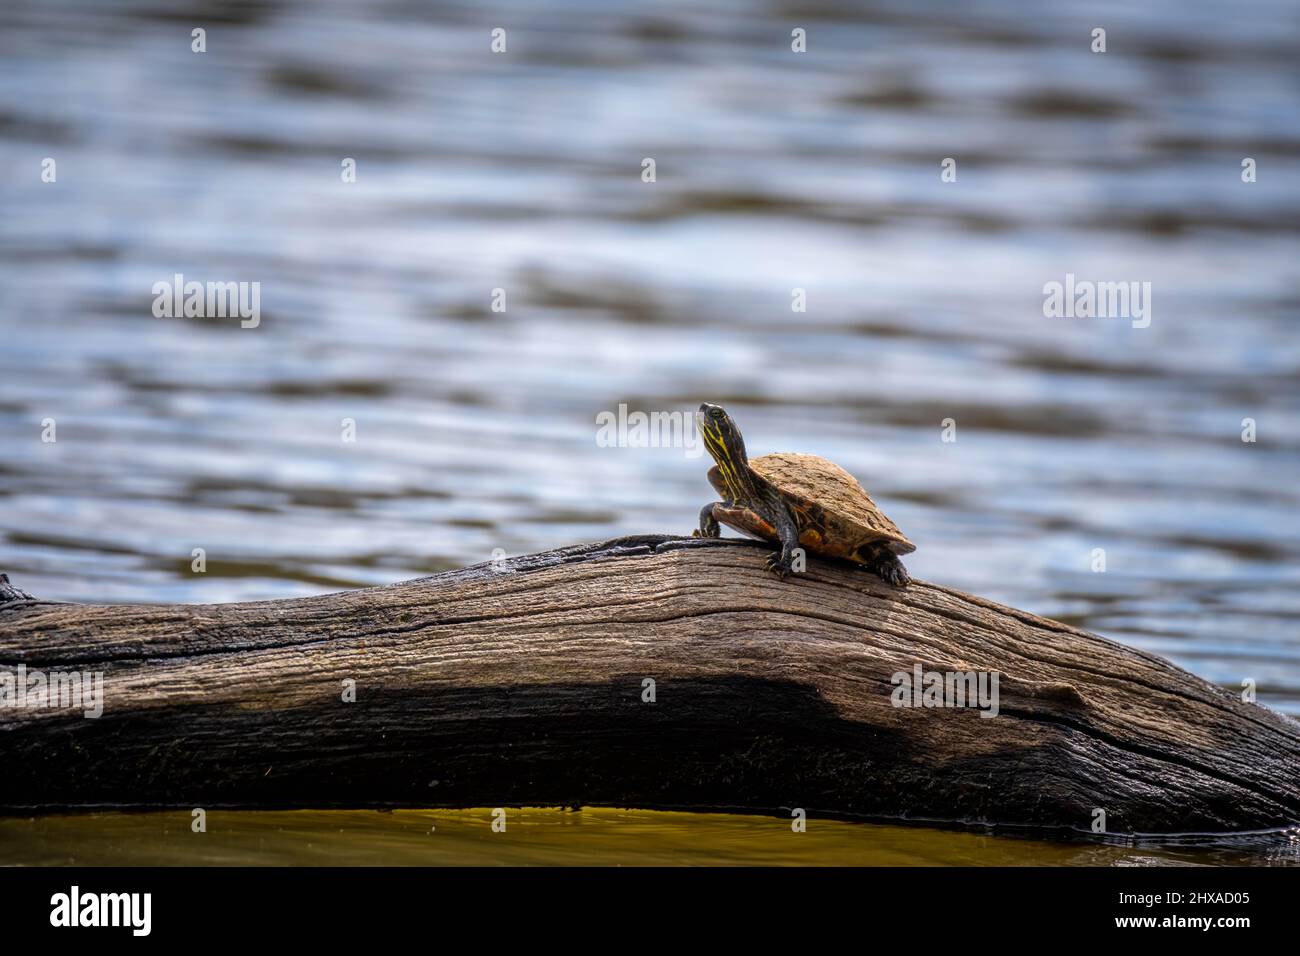 A tiny Painted Turtle (Chrysemys picta) has the sunning log all to itself. Raleigh, North Carlina. Stock Photo